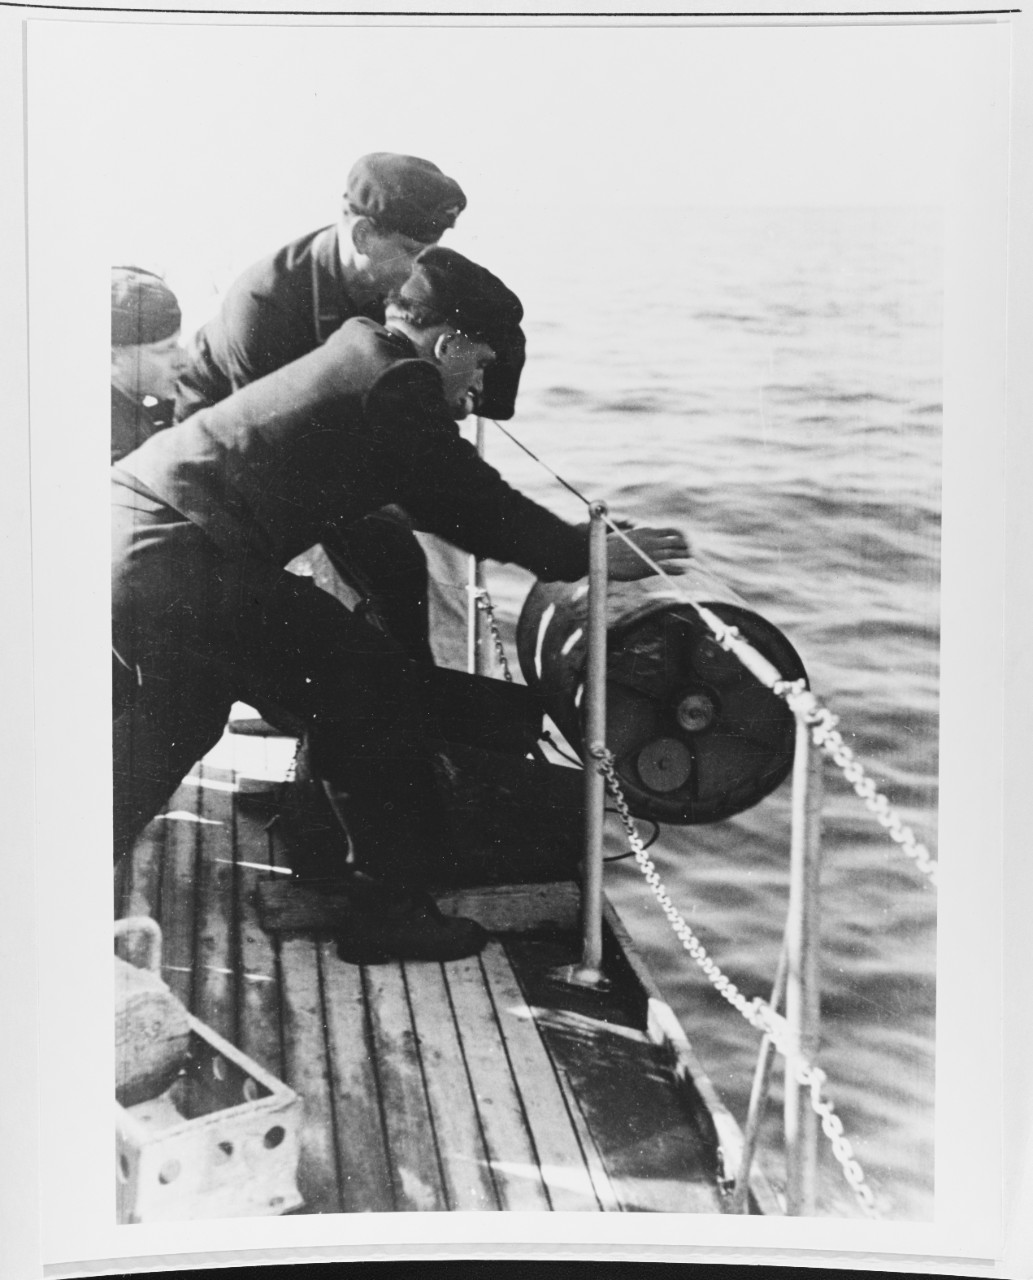 Launching a depth charge